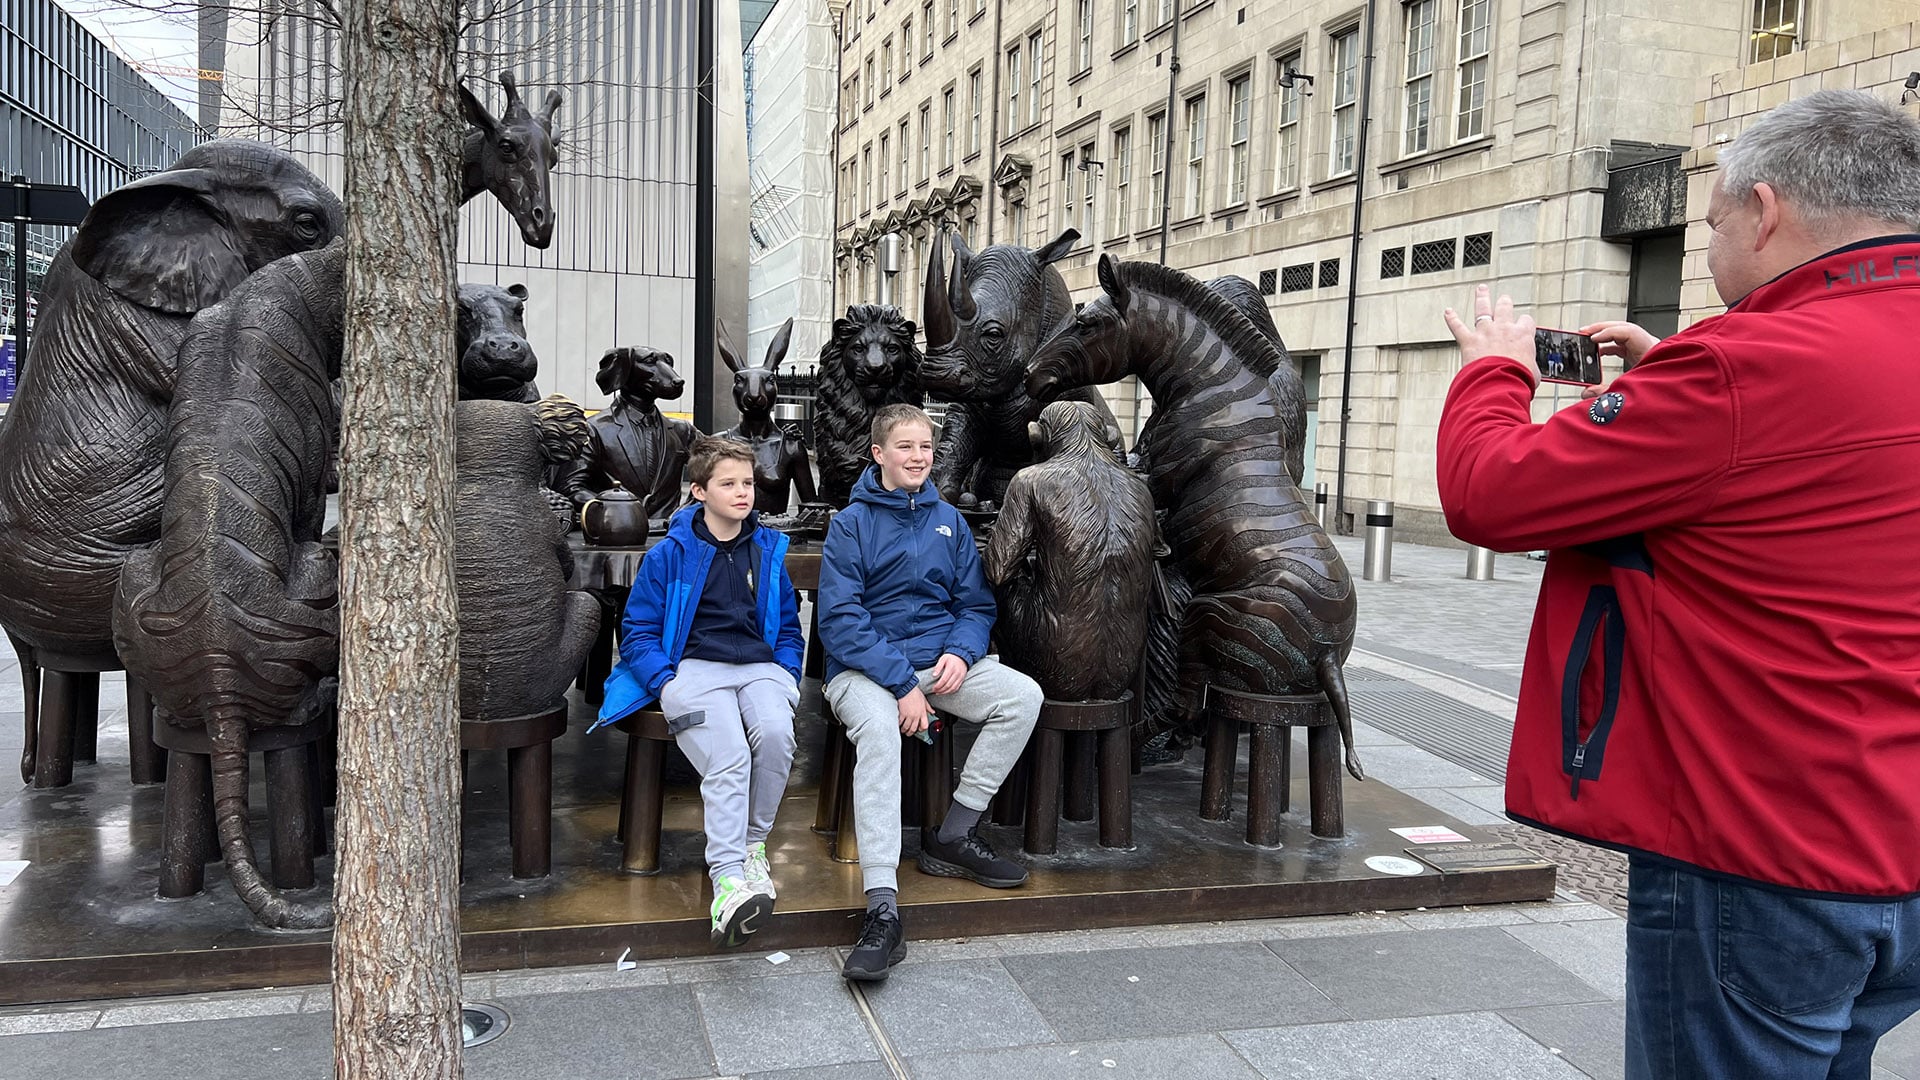 dad-taking-picture-of-kids-on-animal-statues-outside-paddington-station